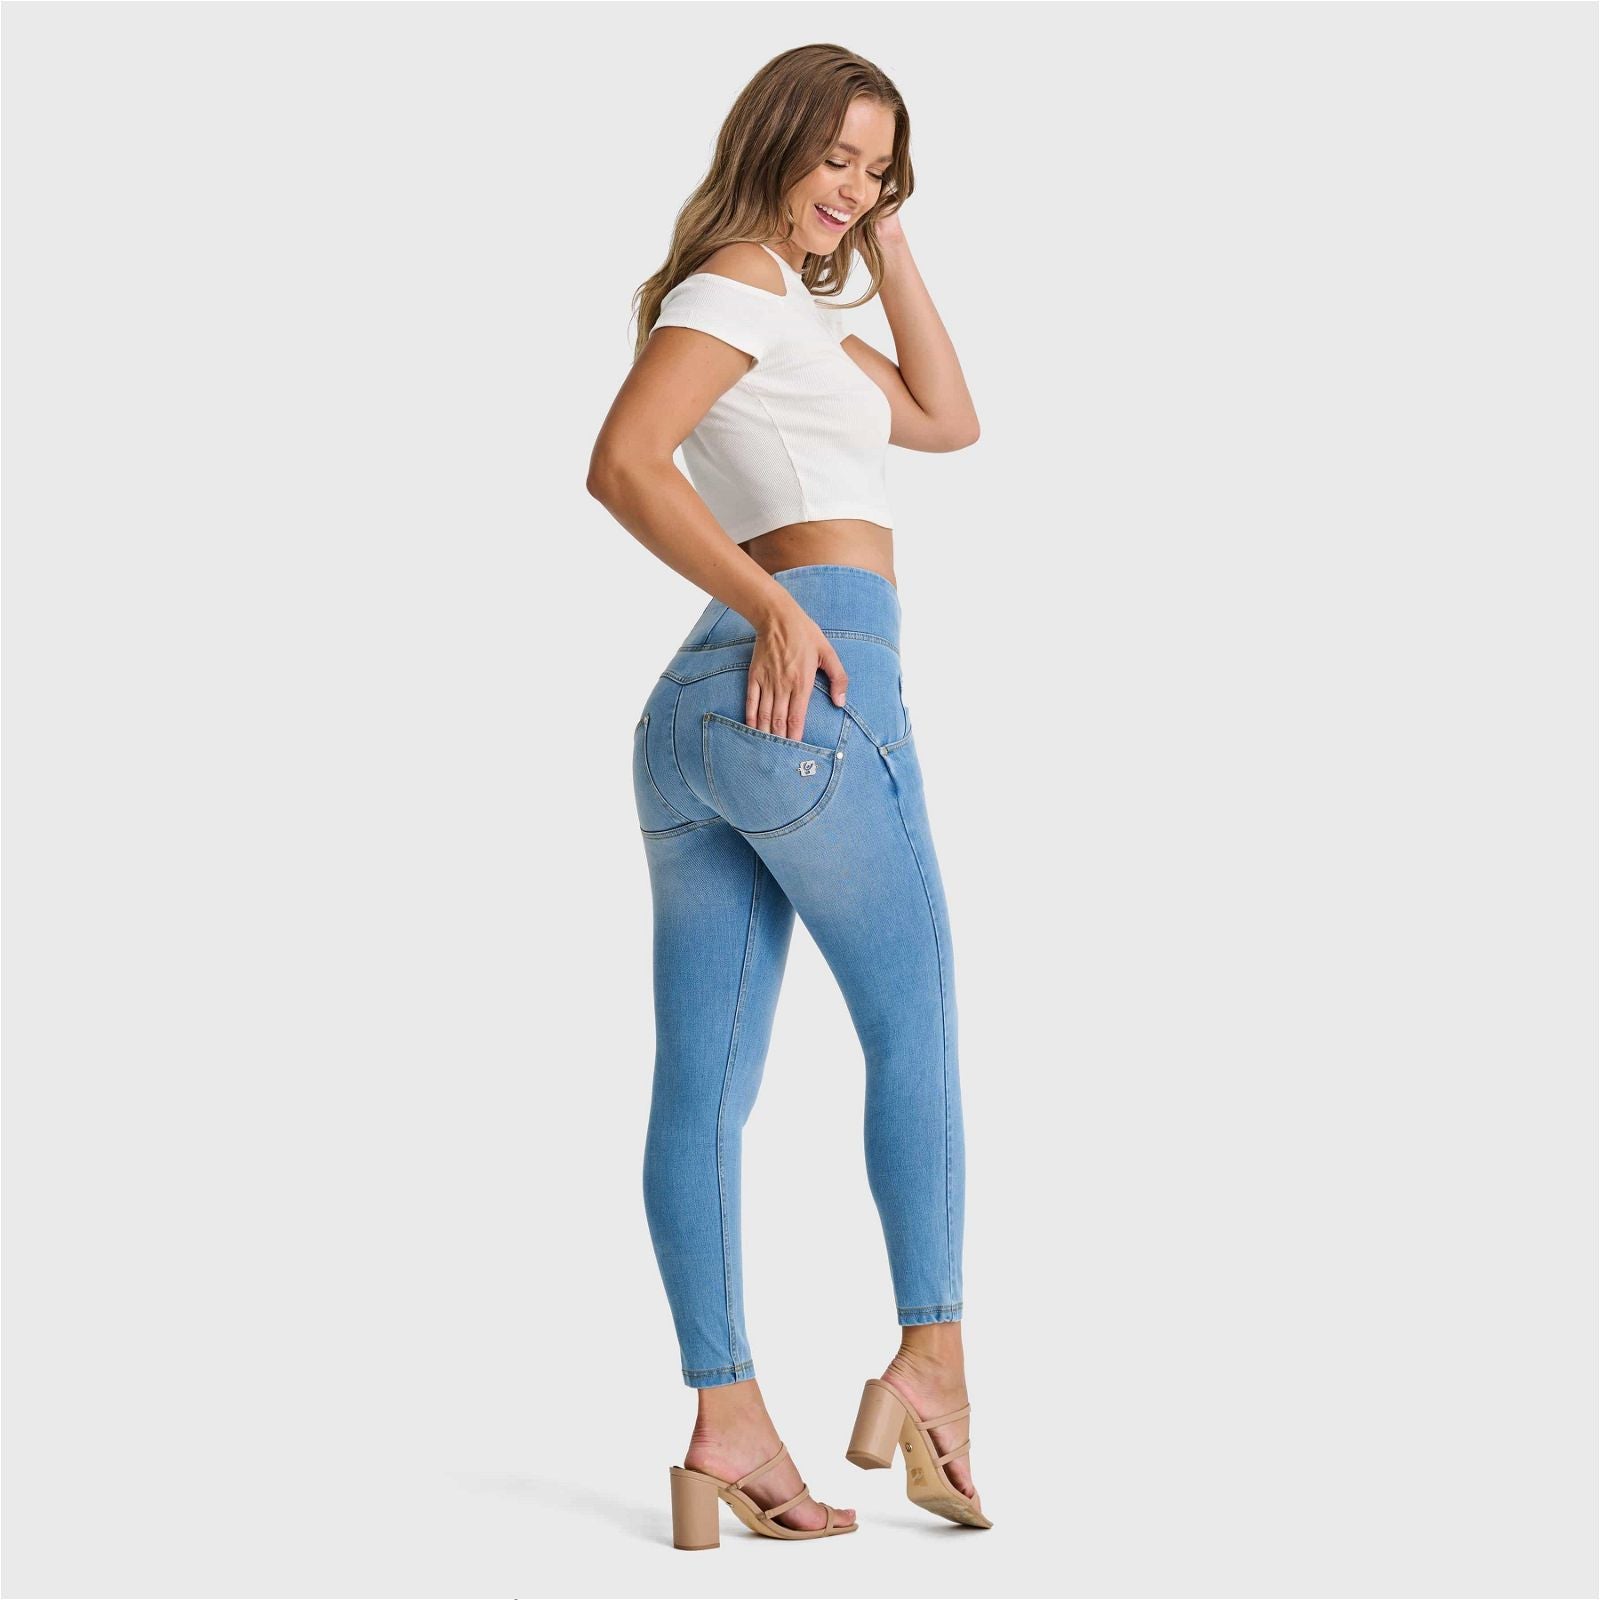 WR.UP® SNUG Jeans - High Waisted - 7/8 Length - Light Blue + Yellow Stitching 3